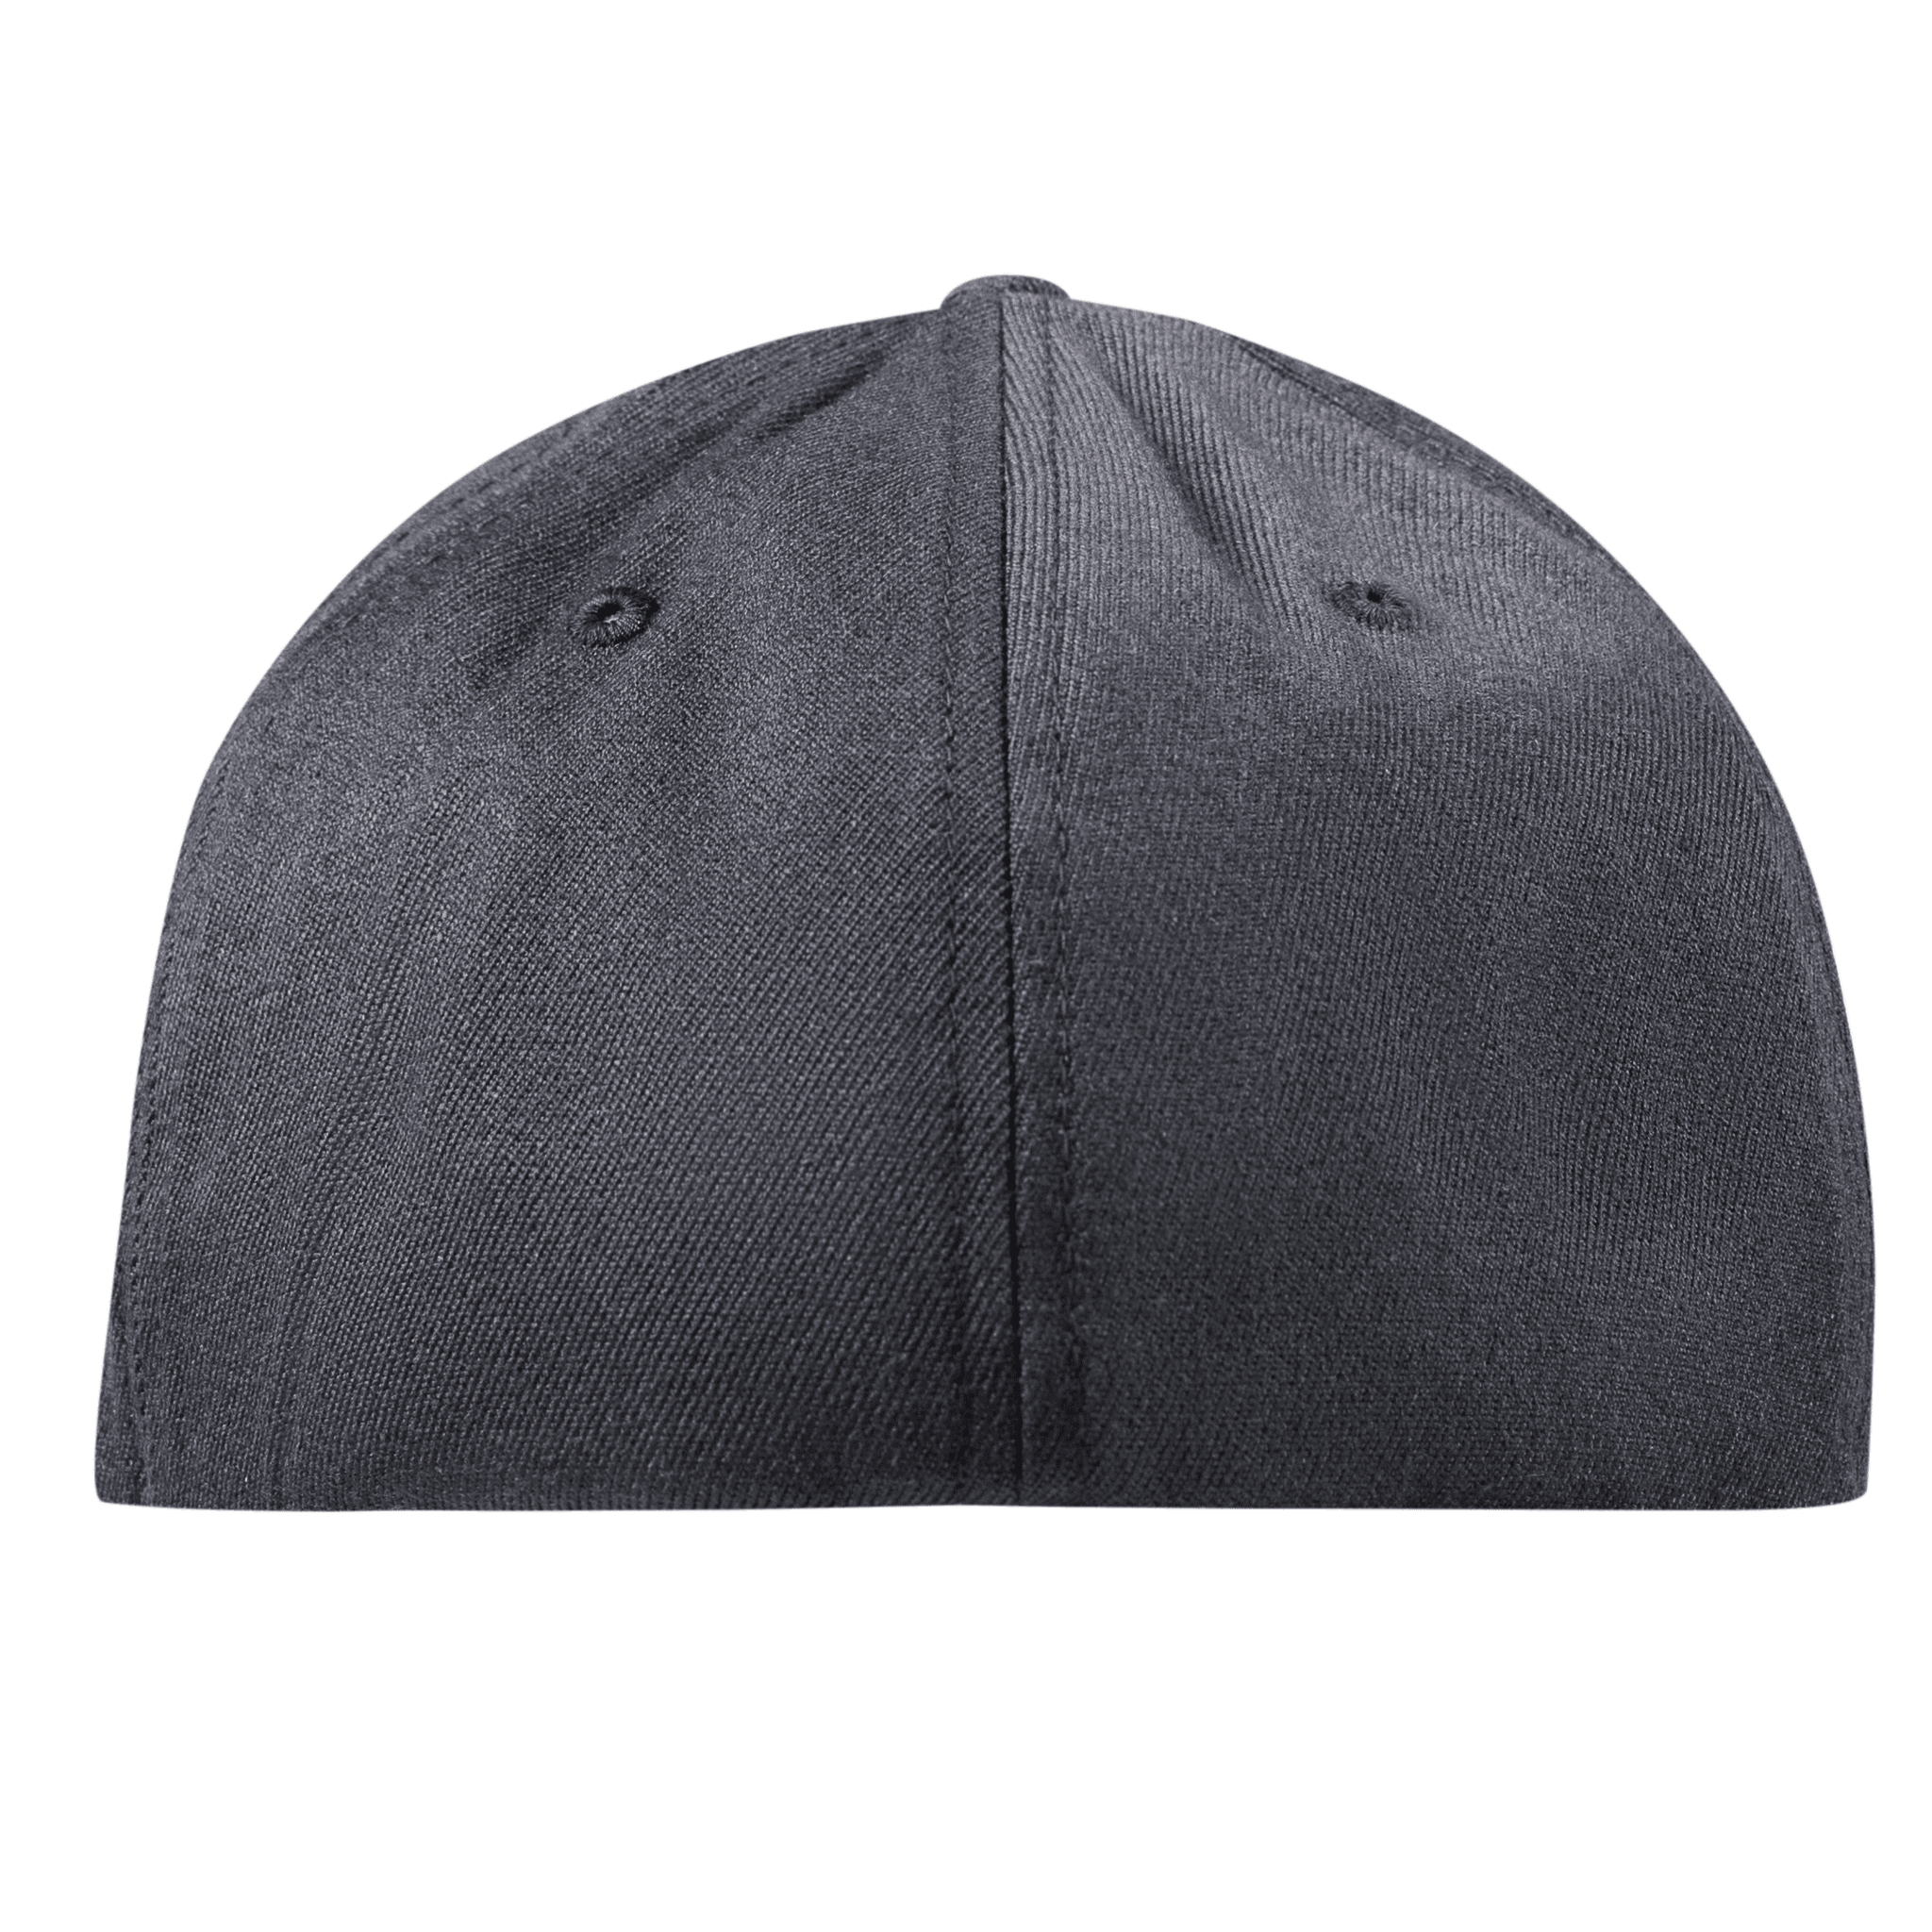 New York Compass Flexfit Fitted Back Charcoal